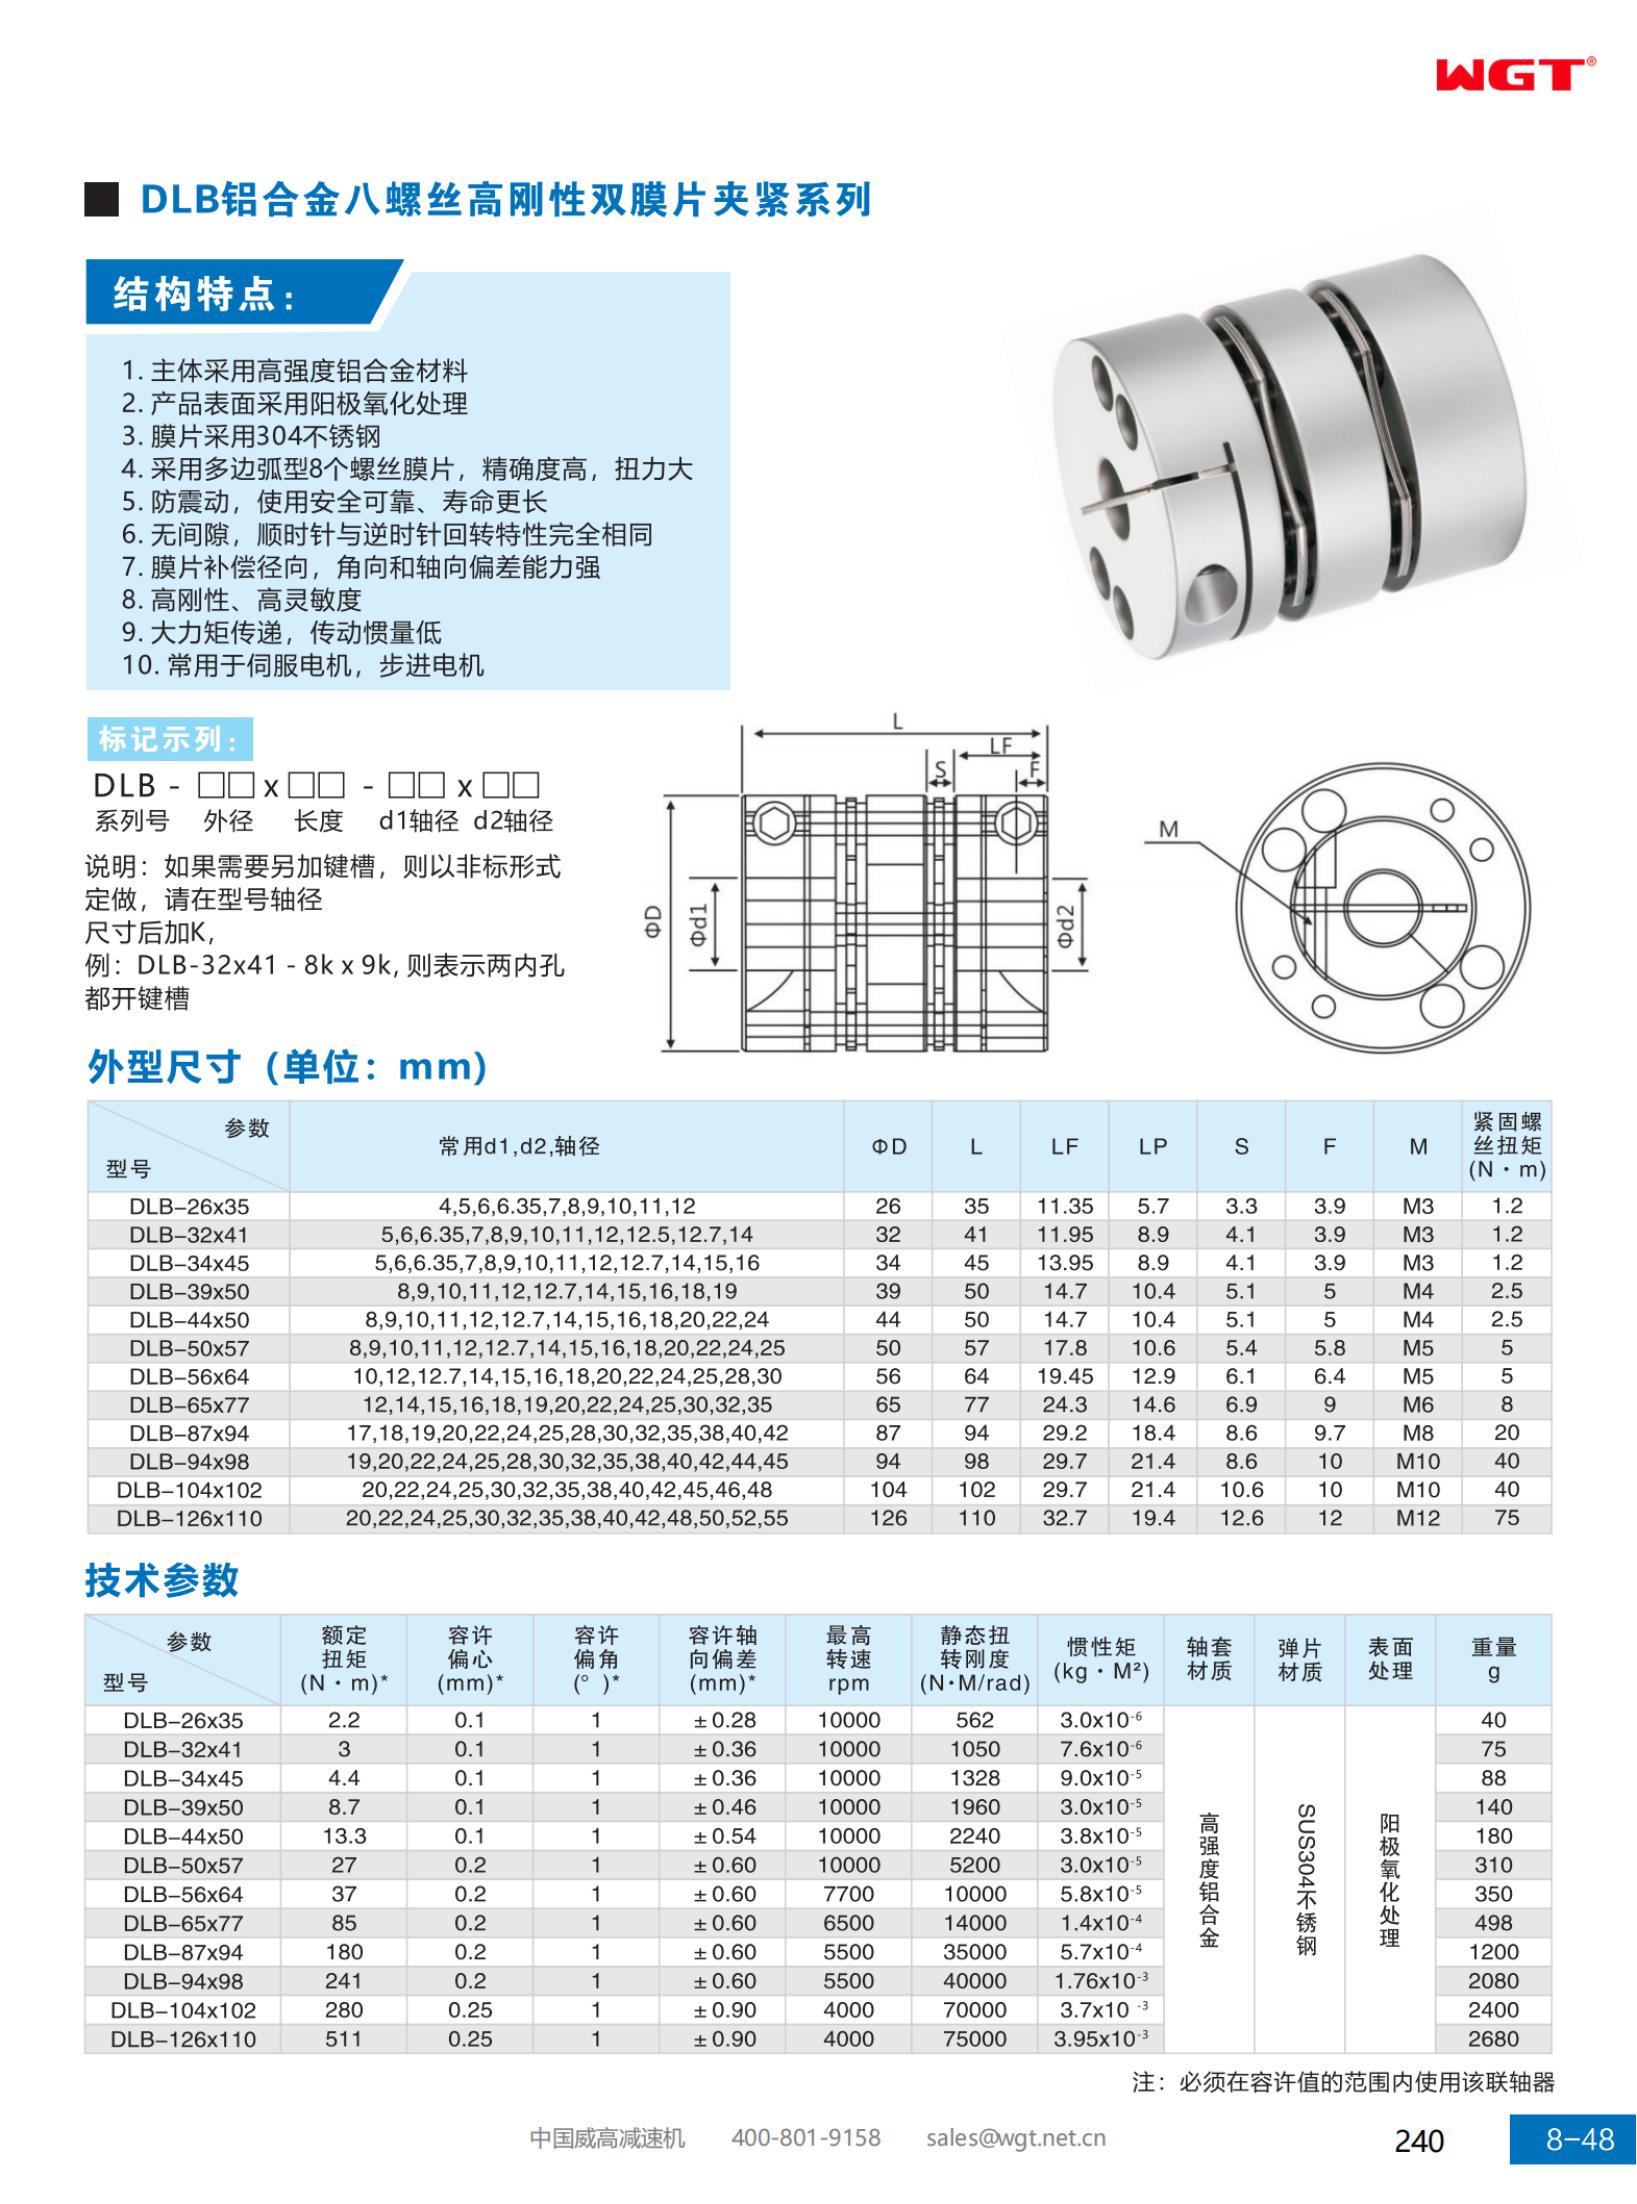 DLB aluminum alloy eight screw high rigidity double diaphragm clamping series